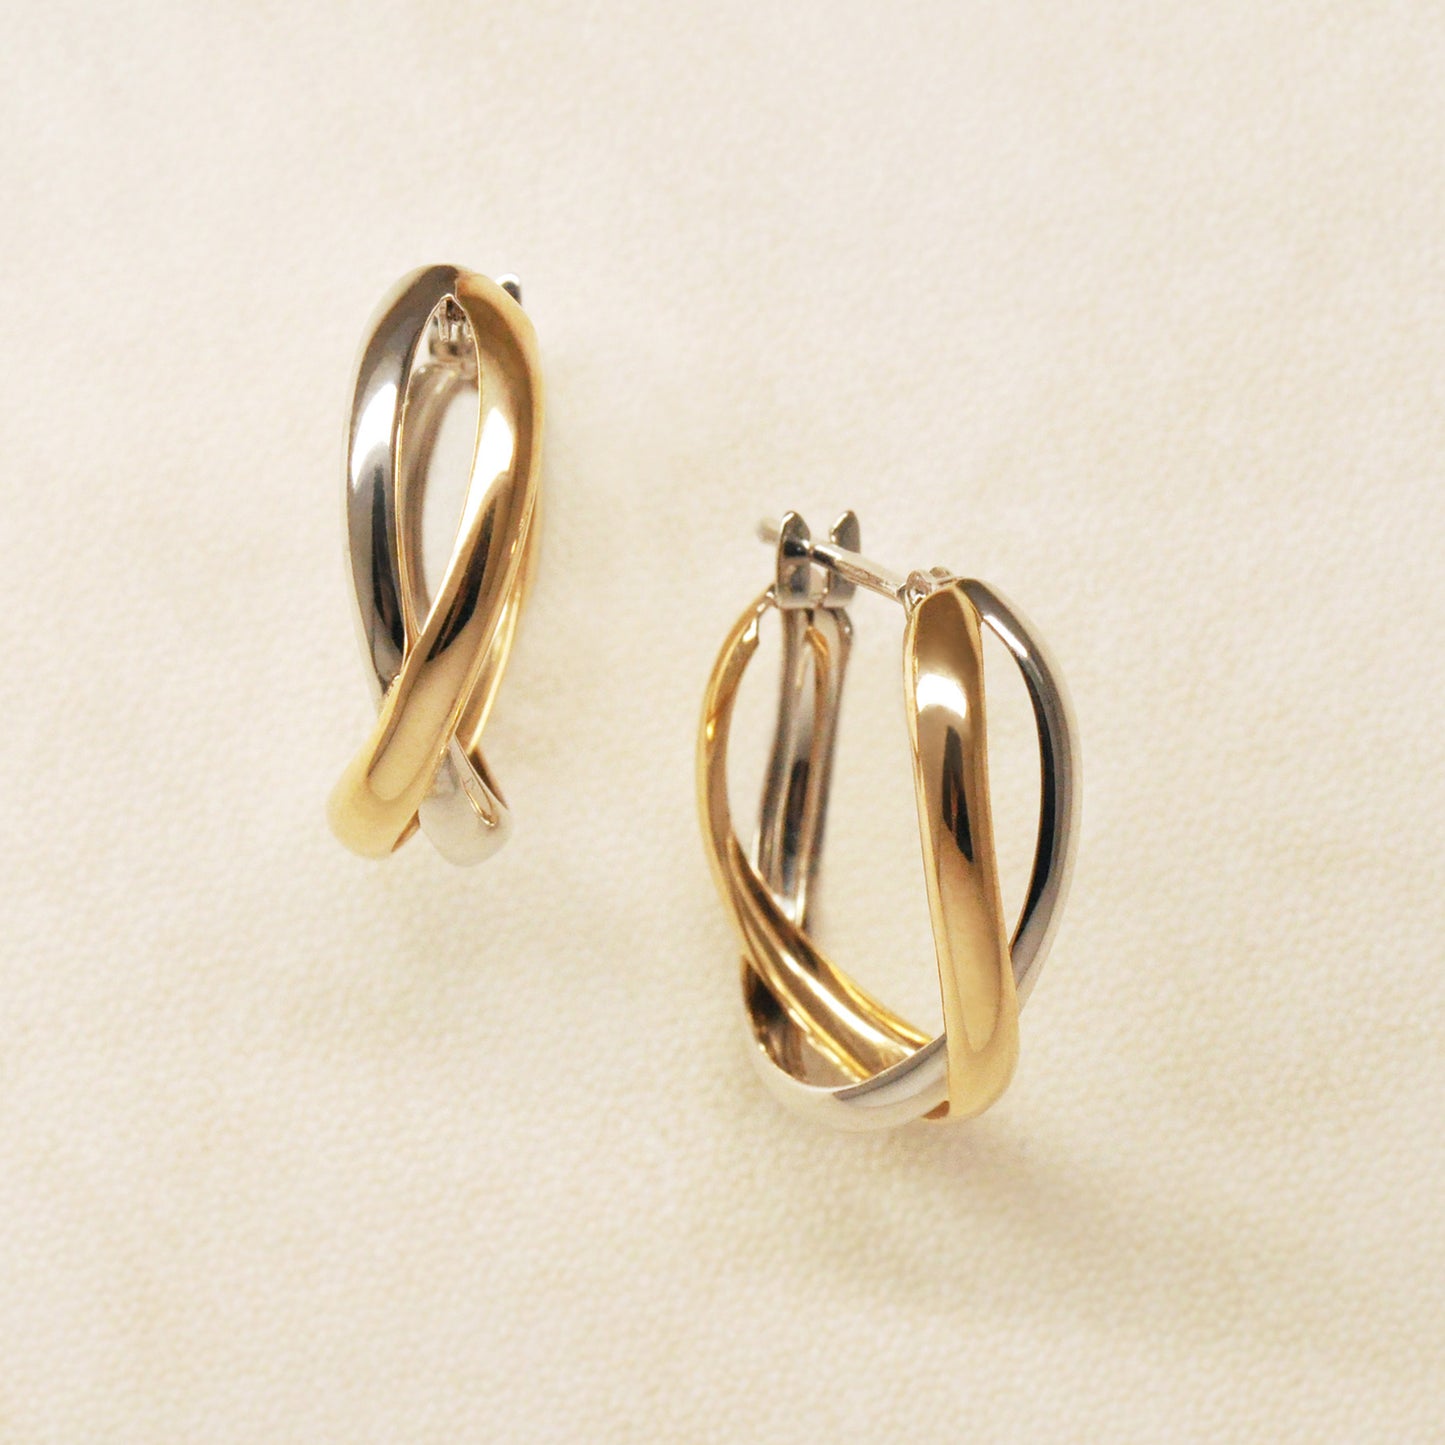 14K/10K Gold Cross Hoop Earrings (Large) (White Gold / Yellow Gold) - Product Image